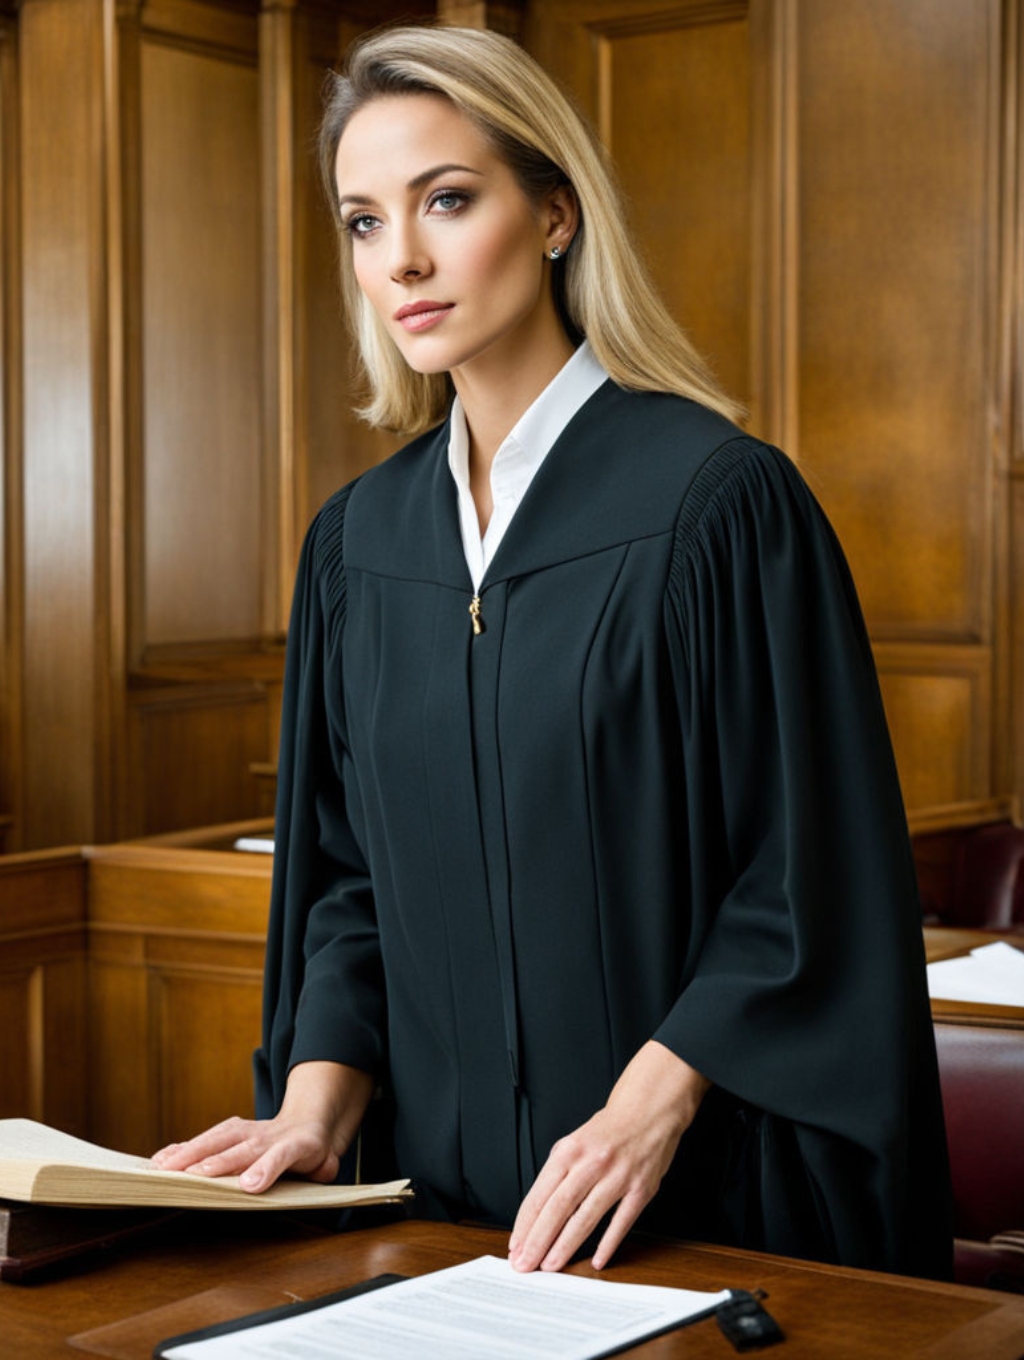 Lawyers & Judges Women: Profile Pictures & Wall Frames-Theme:6